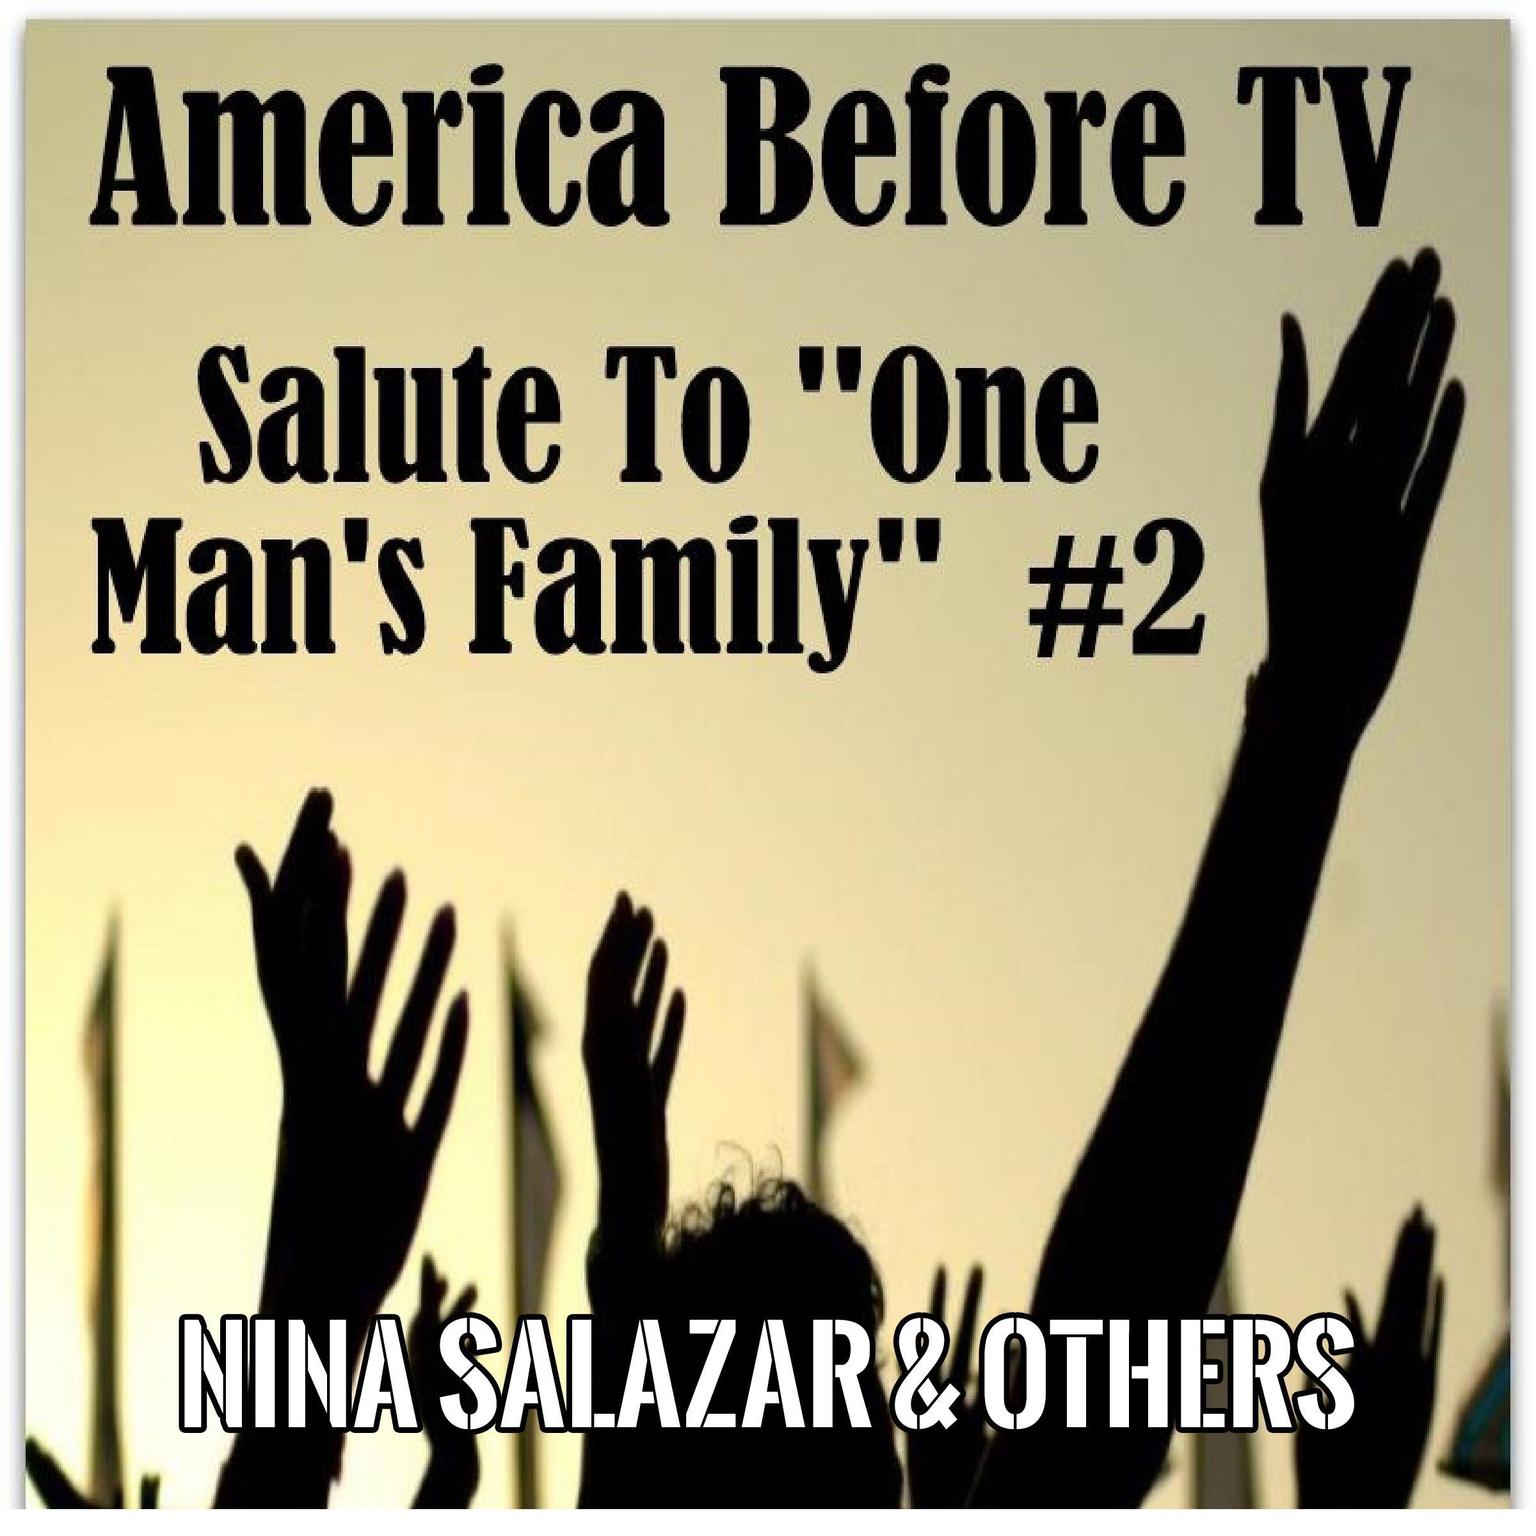 America Before TV - Salute To One Mans Family  #2 (Abridged) Audiobook, by Classic Tales of Mystery